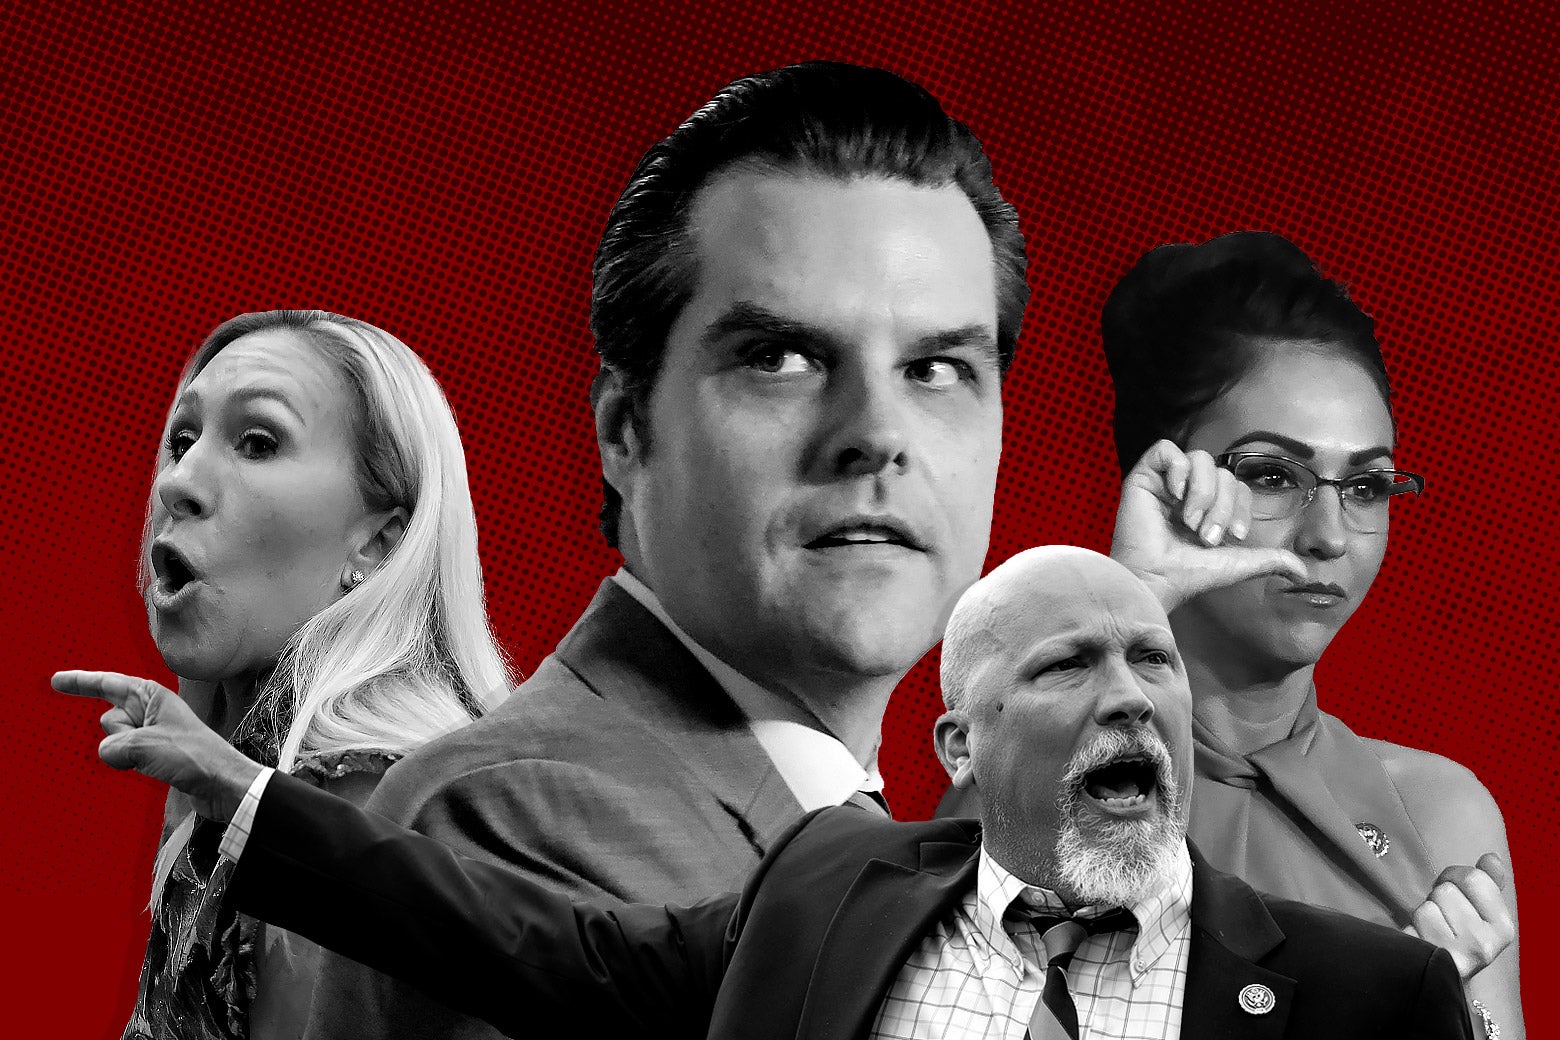 Marjorie Taylor Greene, Chip Roy, Lauren Boebert, and Matt Gaetz in various states of annoyance and pushiness against a red background.